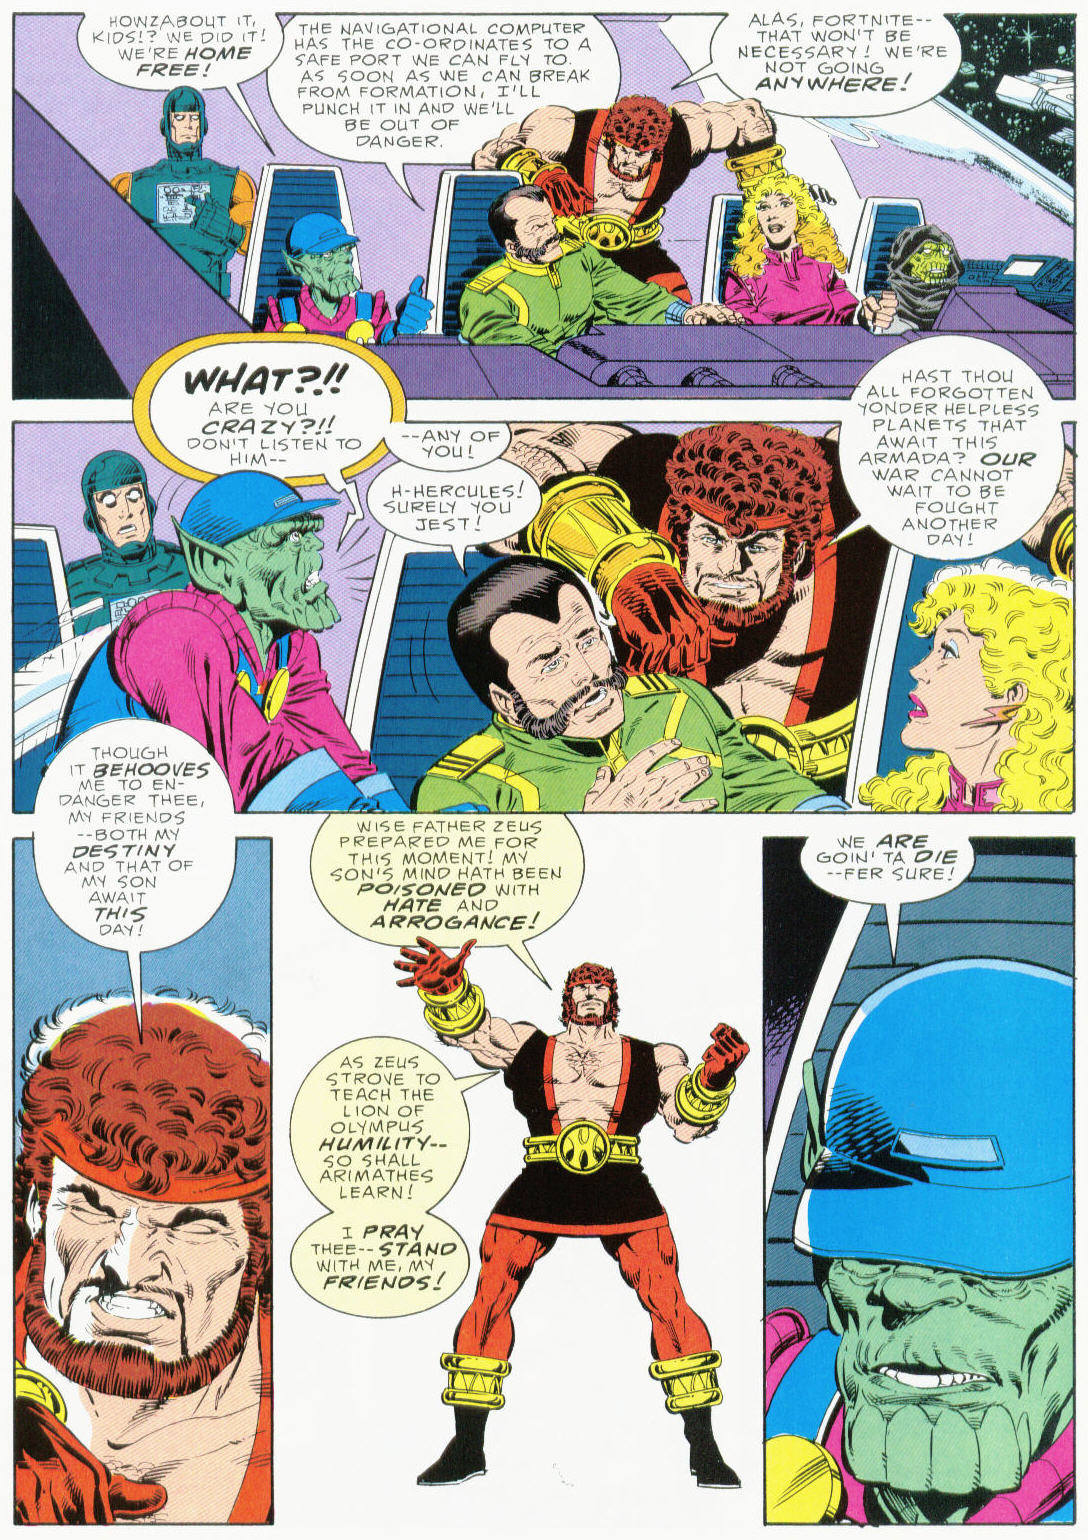 Marvel Graphic Novel issue 37 - Hercules Prince of Power - Full Circle - Page 57